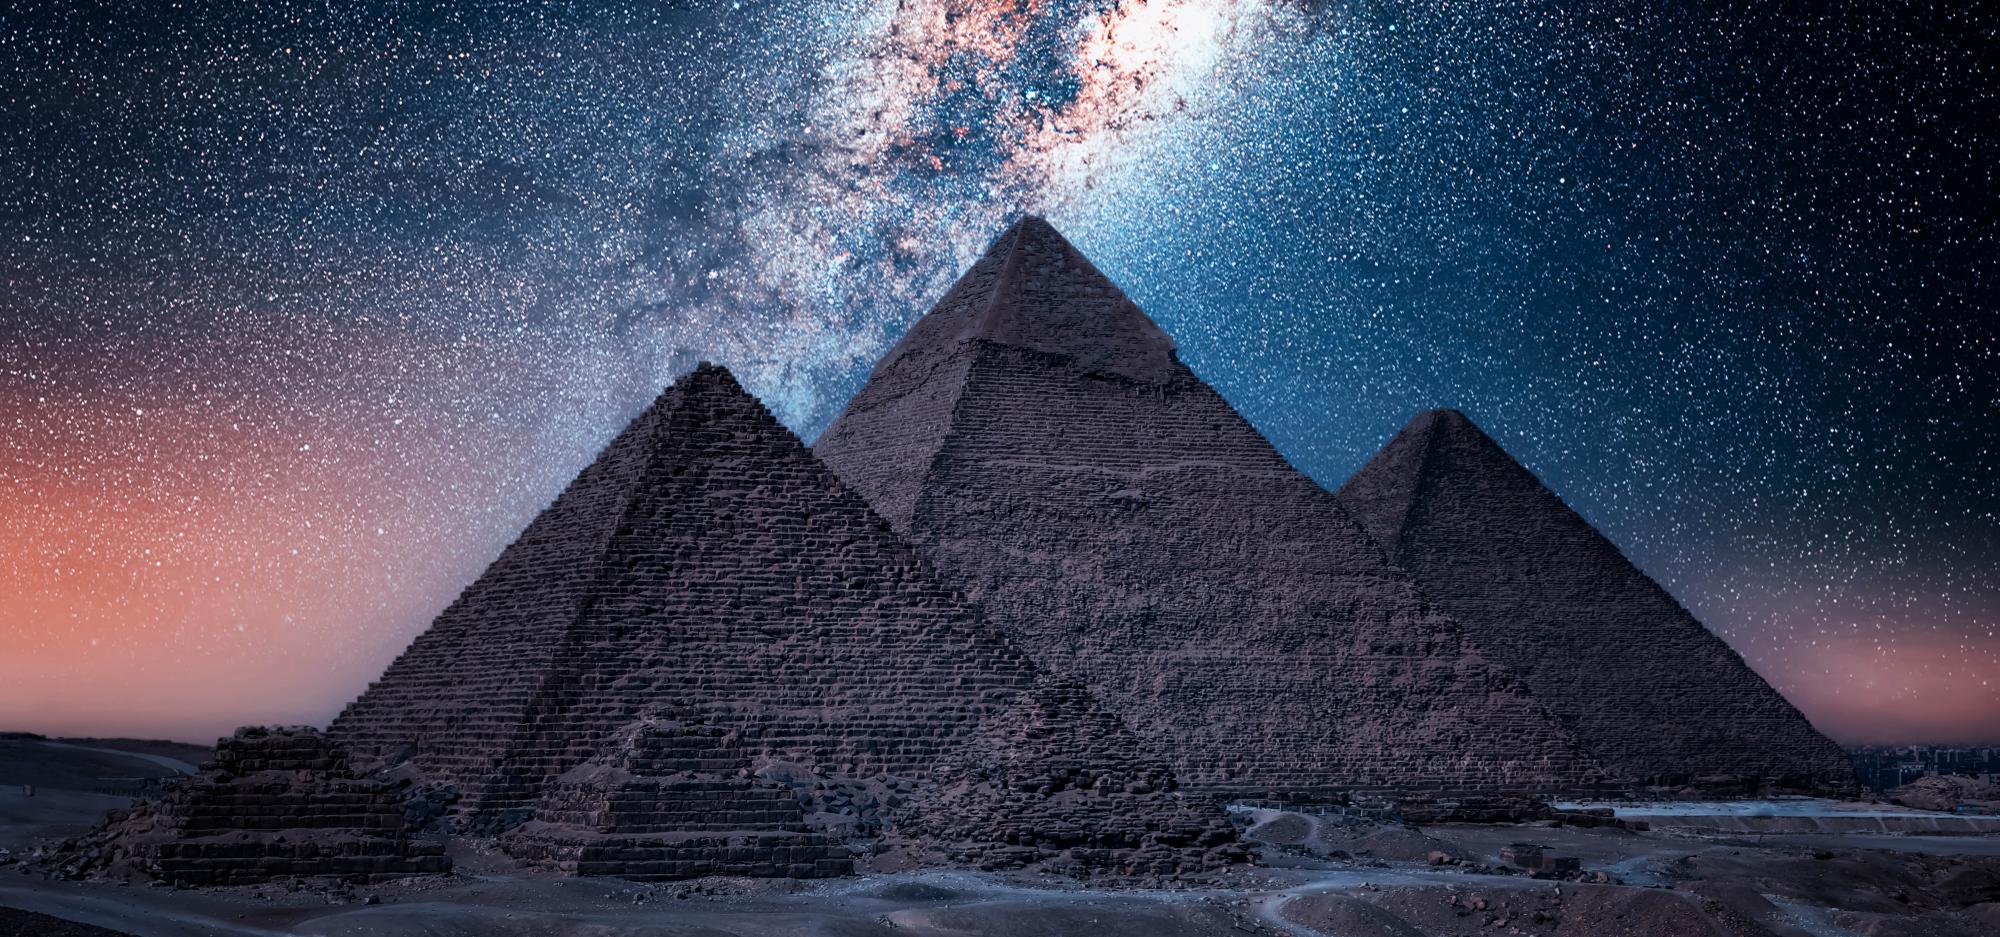 Three pyramids stand in darkness in a desert at night, backlit by the milkyway which shines vividly in the background in hues of orange, blue, purple and white, surrounded by hundreds of stars